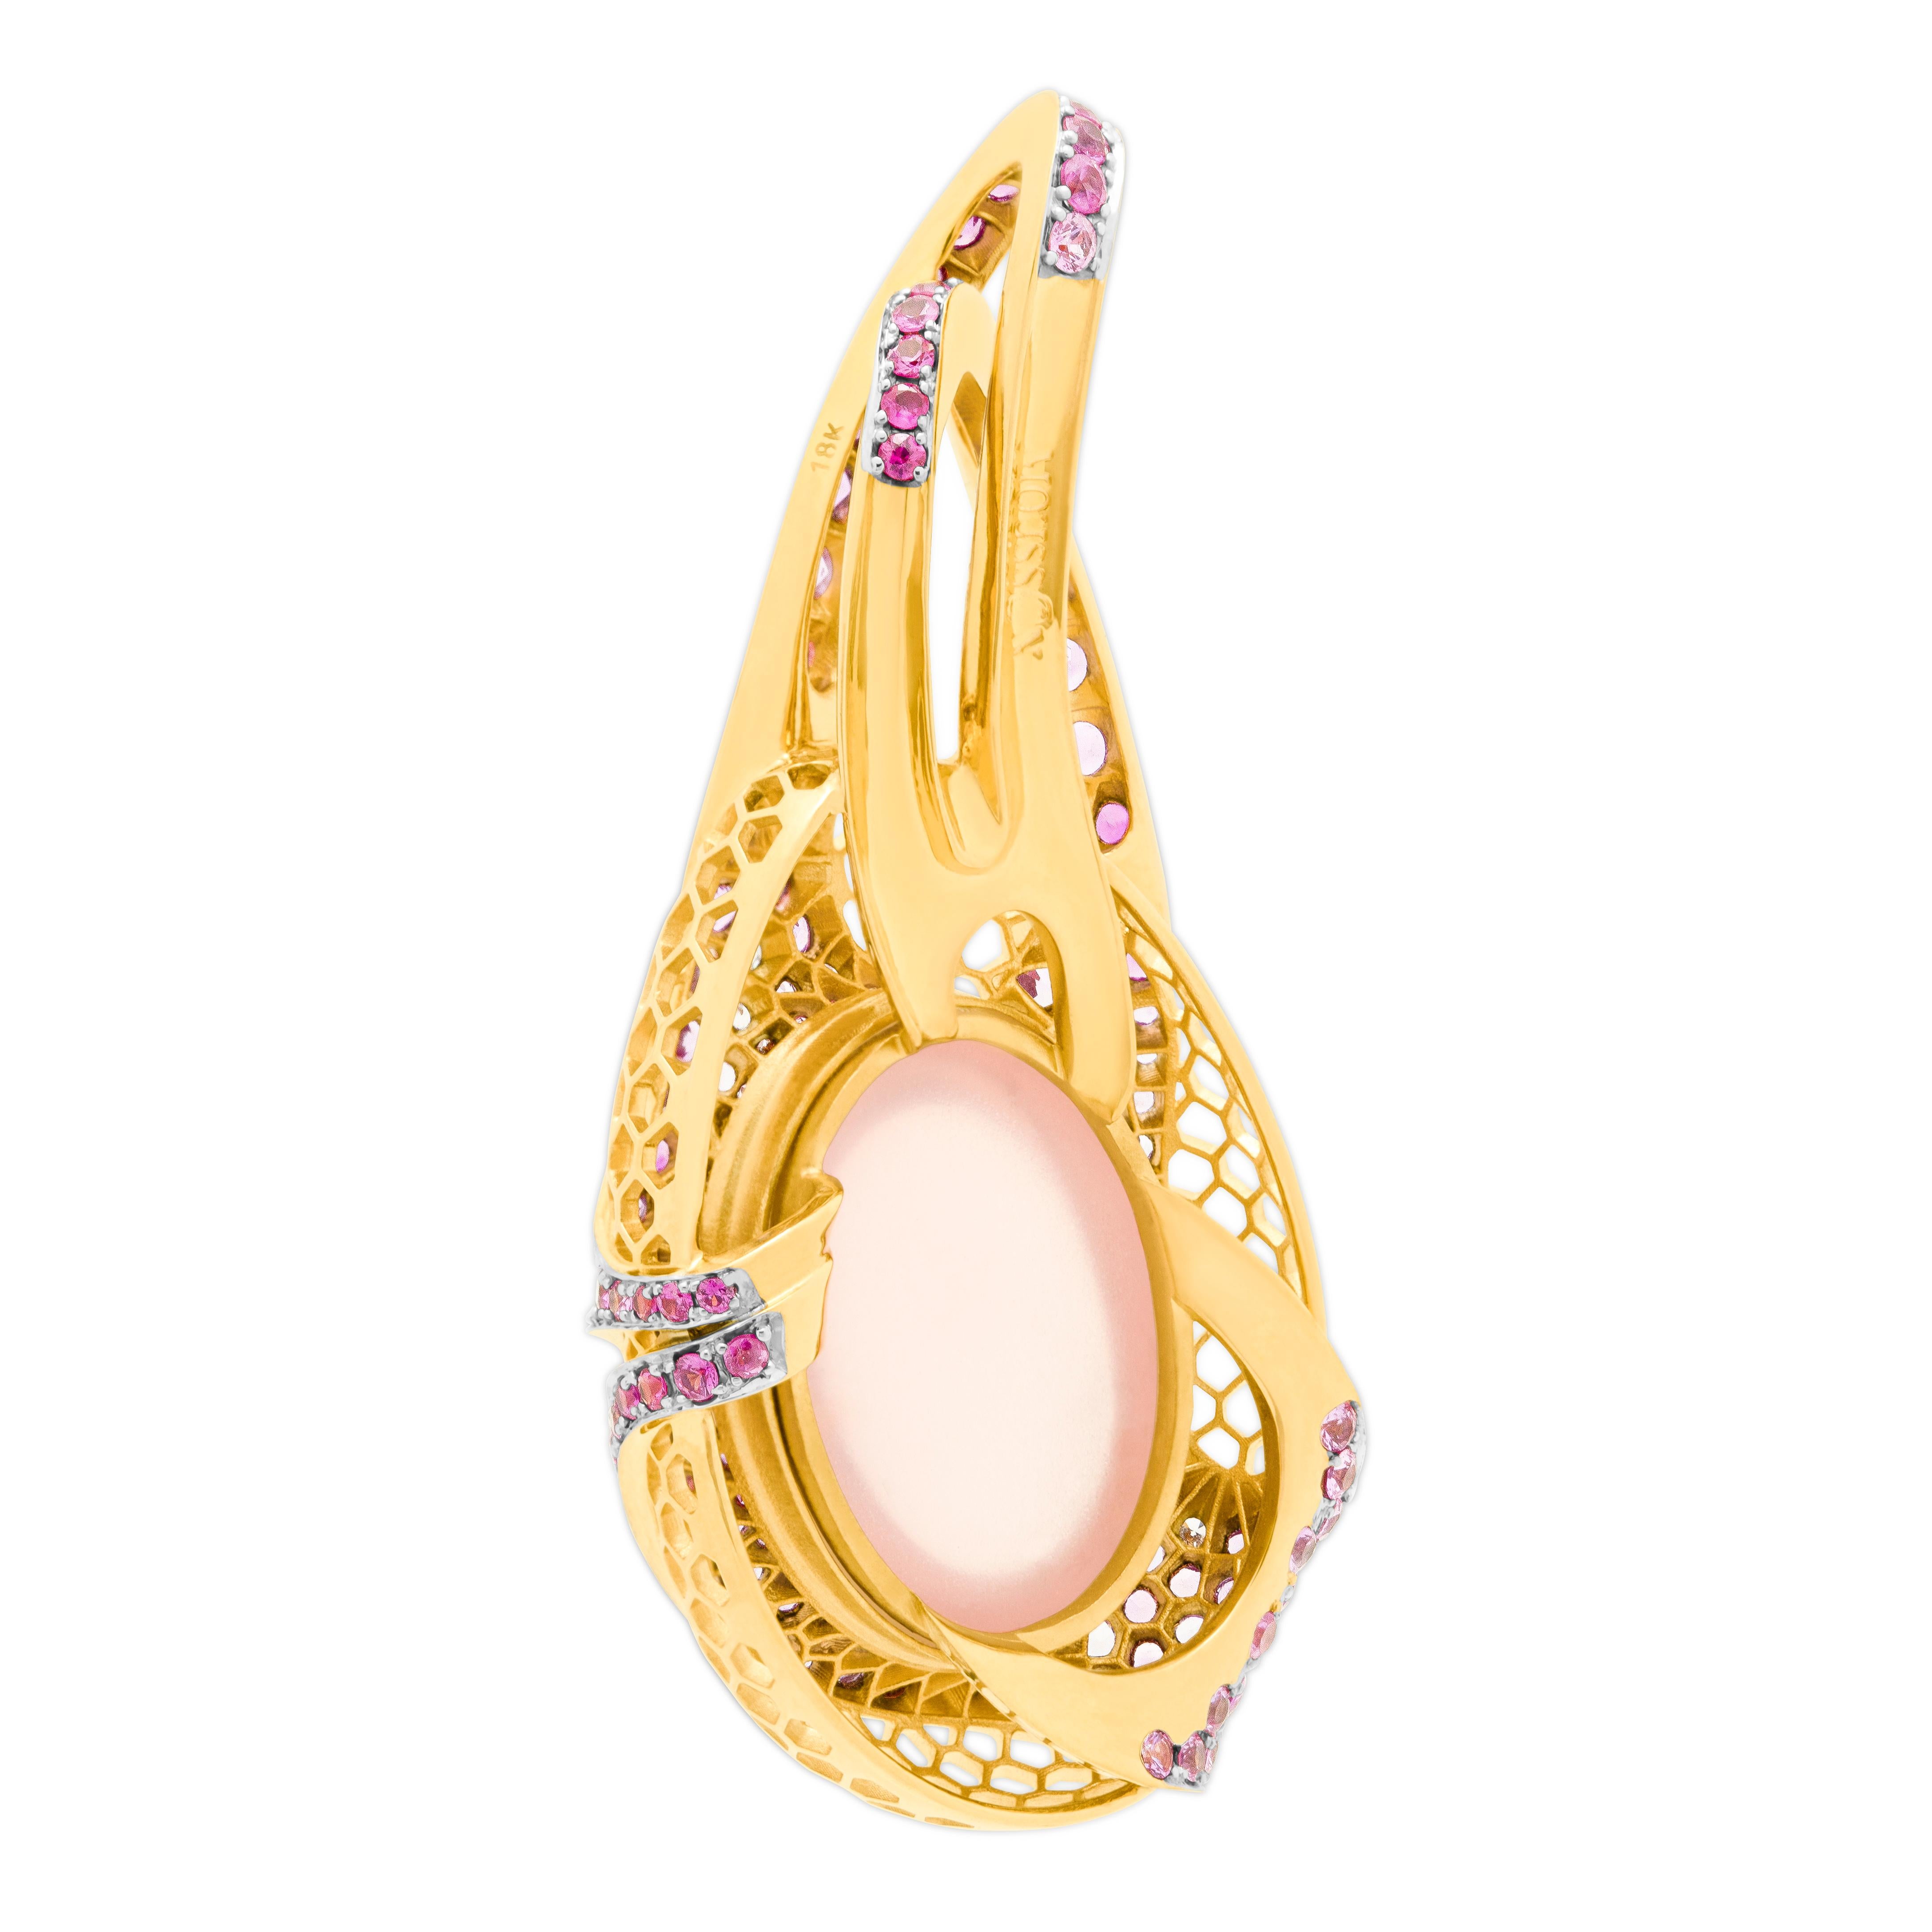 Rose Quartz 16.23 Carat Diamonds Pink Sapphires 18 Karat Yellow Gold Pendant
What kind of patterns has not been created by nature. Honeycomb is one of them. Take a look at our 18 Karat Yellow Gold Pendant from the New Age collection, it perfectly